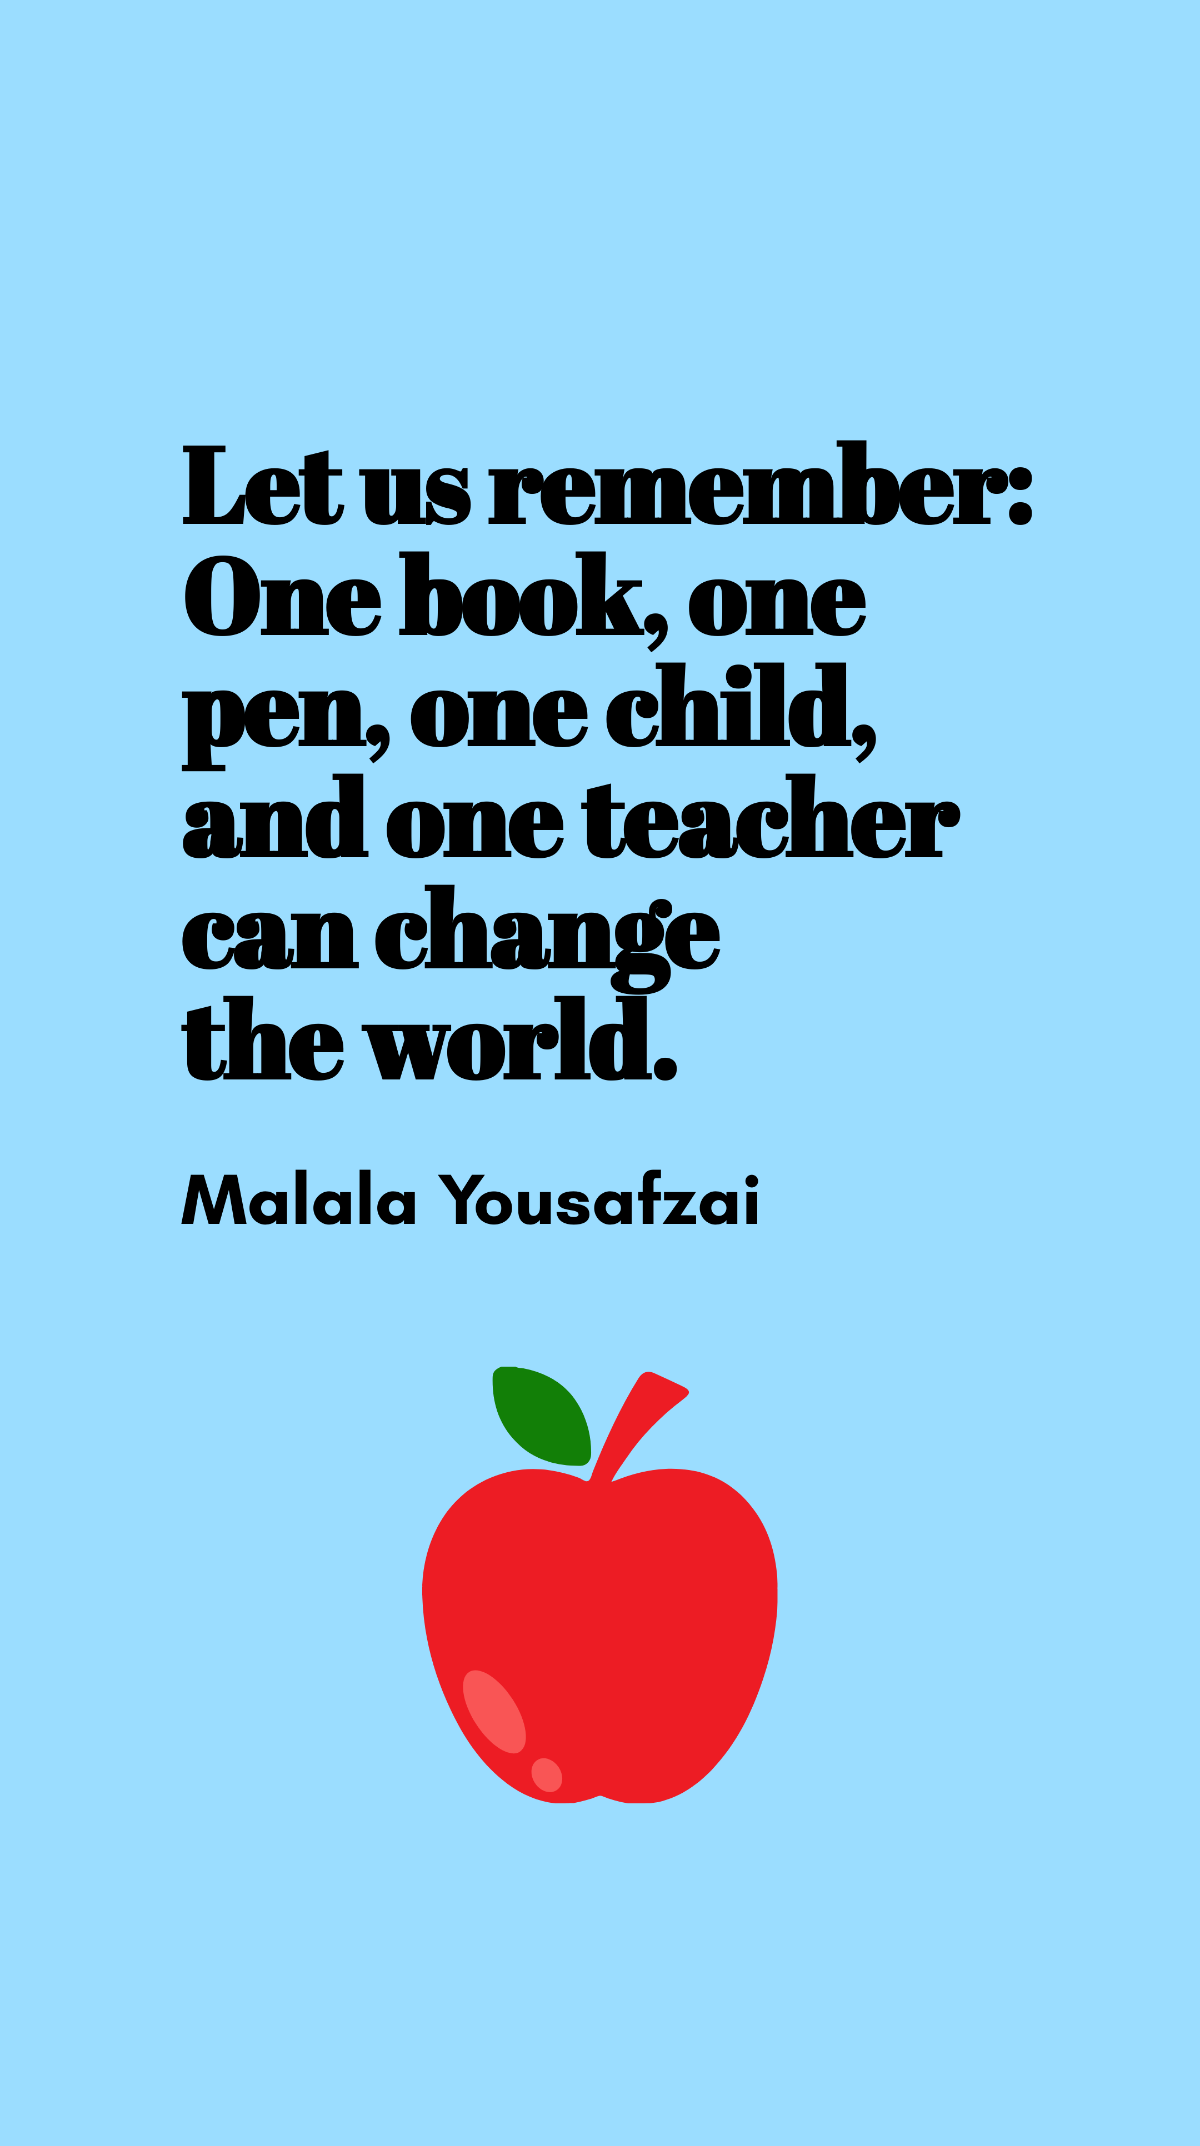 Malala Yousafzai - Let us remember: One book, one pen, one child, and one teacher can change the world. Template